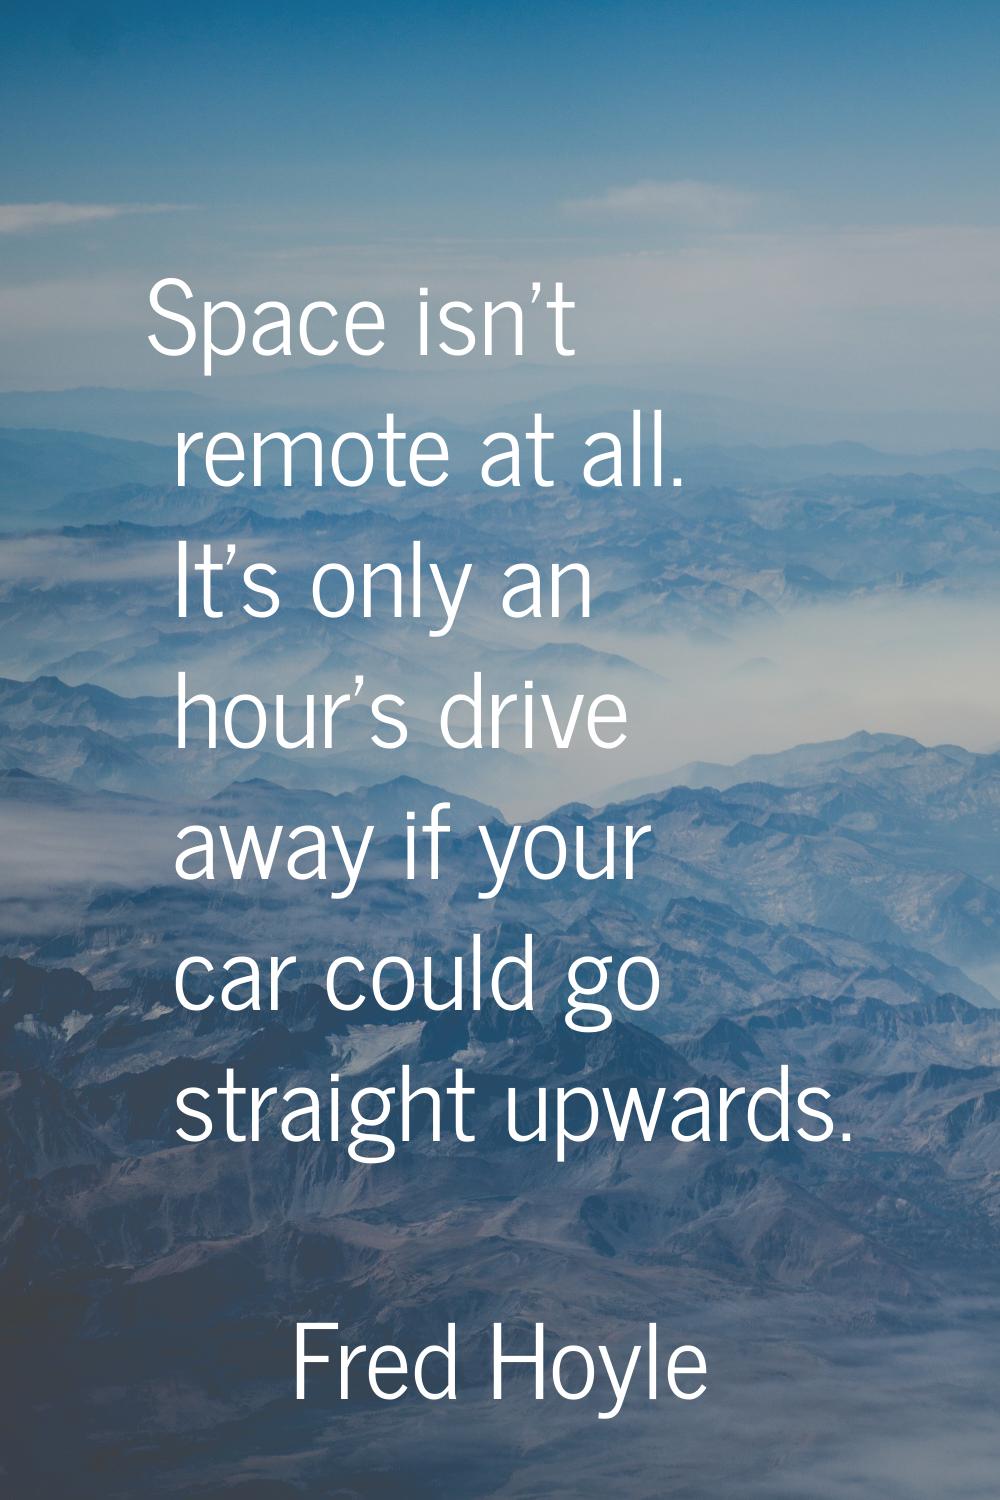 Space isn't remote at all. It's only an hour's drive away if your car could go straight upwards.